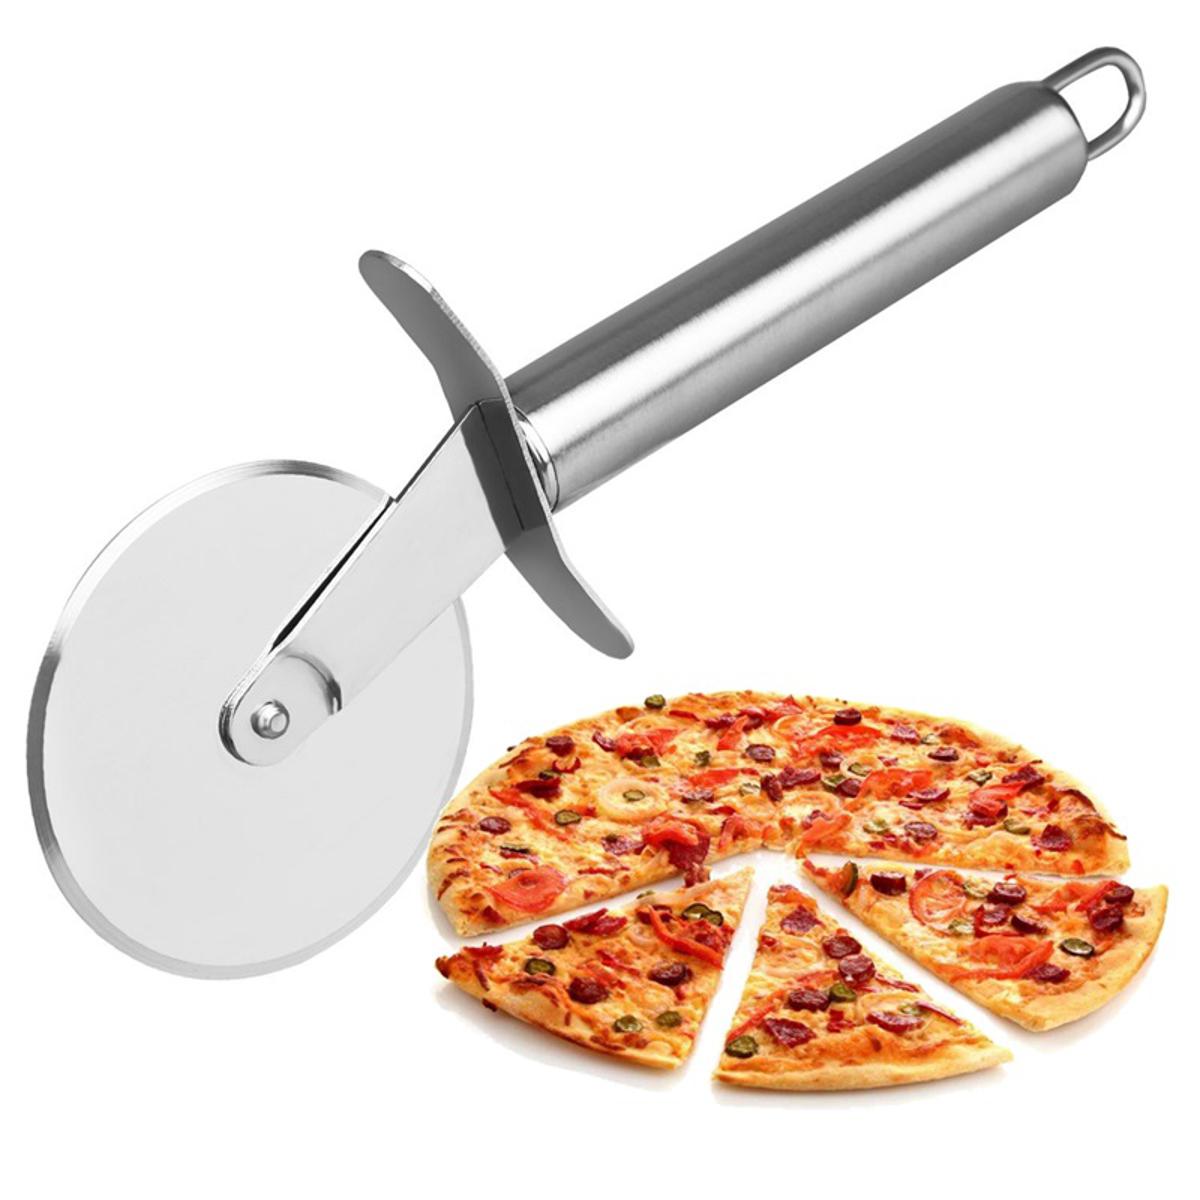 Round Shape Pizza Cutter Stainless Steel Pizza Wheels Cutting Knife Cake Bread Slicer Baking Pizza Kitchen Tools With Super Sharp Blade, Cutter Guard , Heavy Duty Round Handle, Silver-2